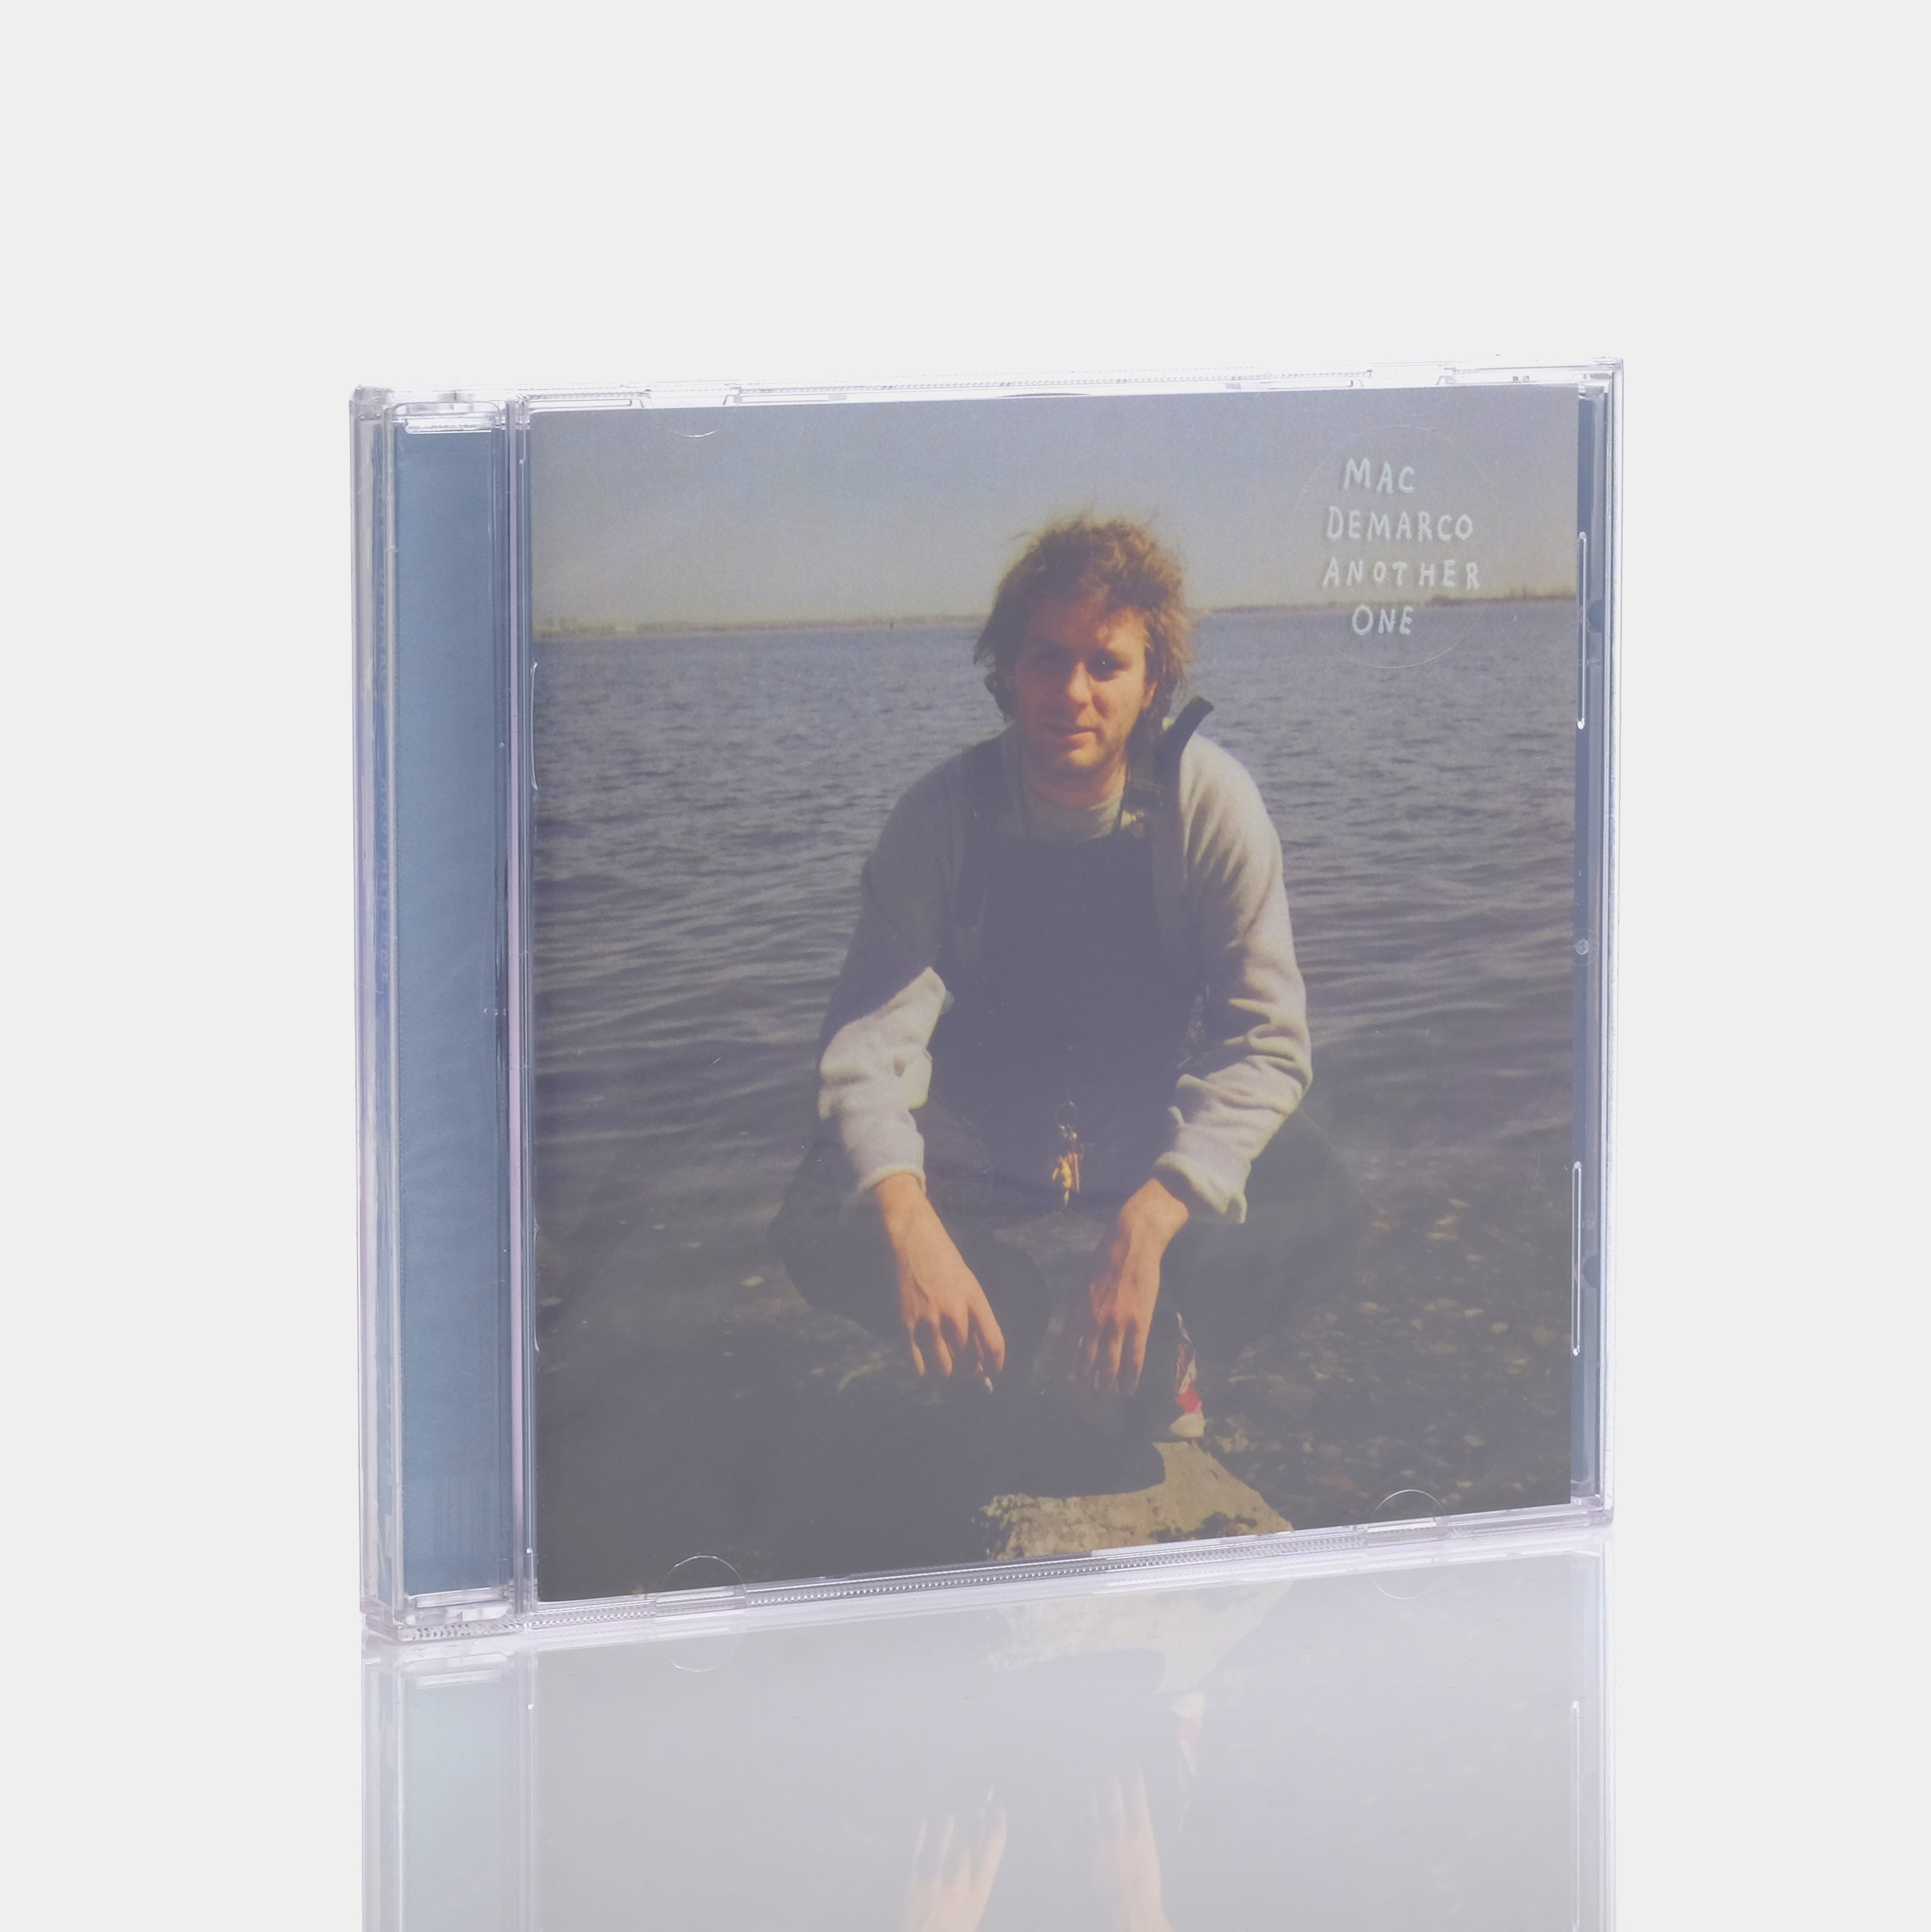 Mac Demarco - Another One CD